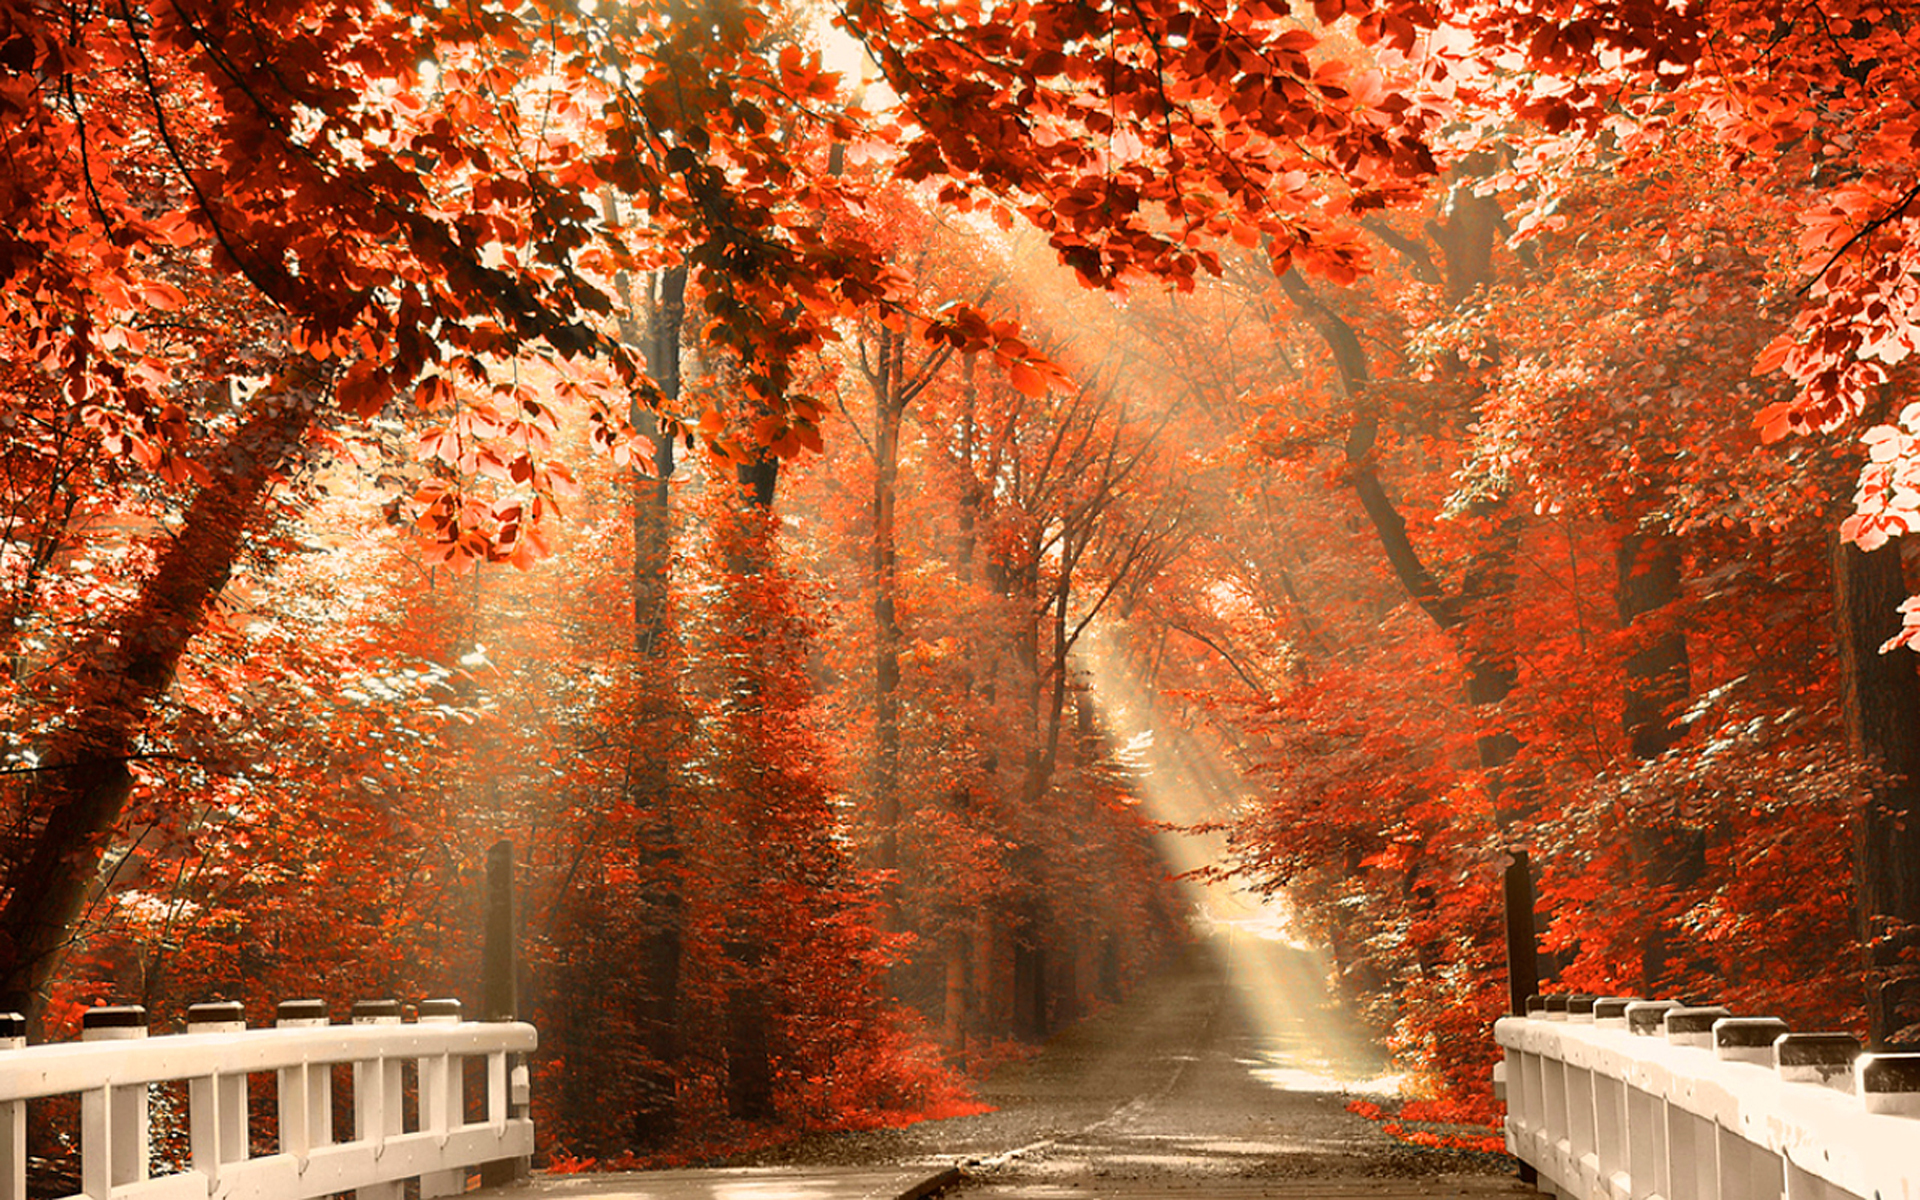 Autumn Nature Pictures To Like Or Share On